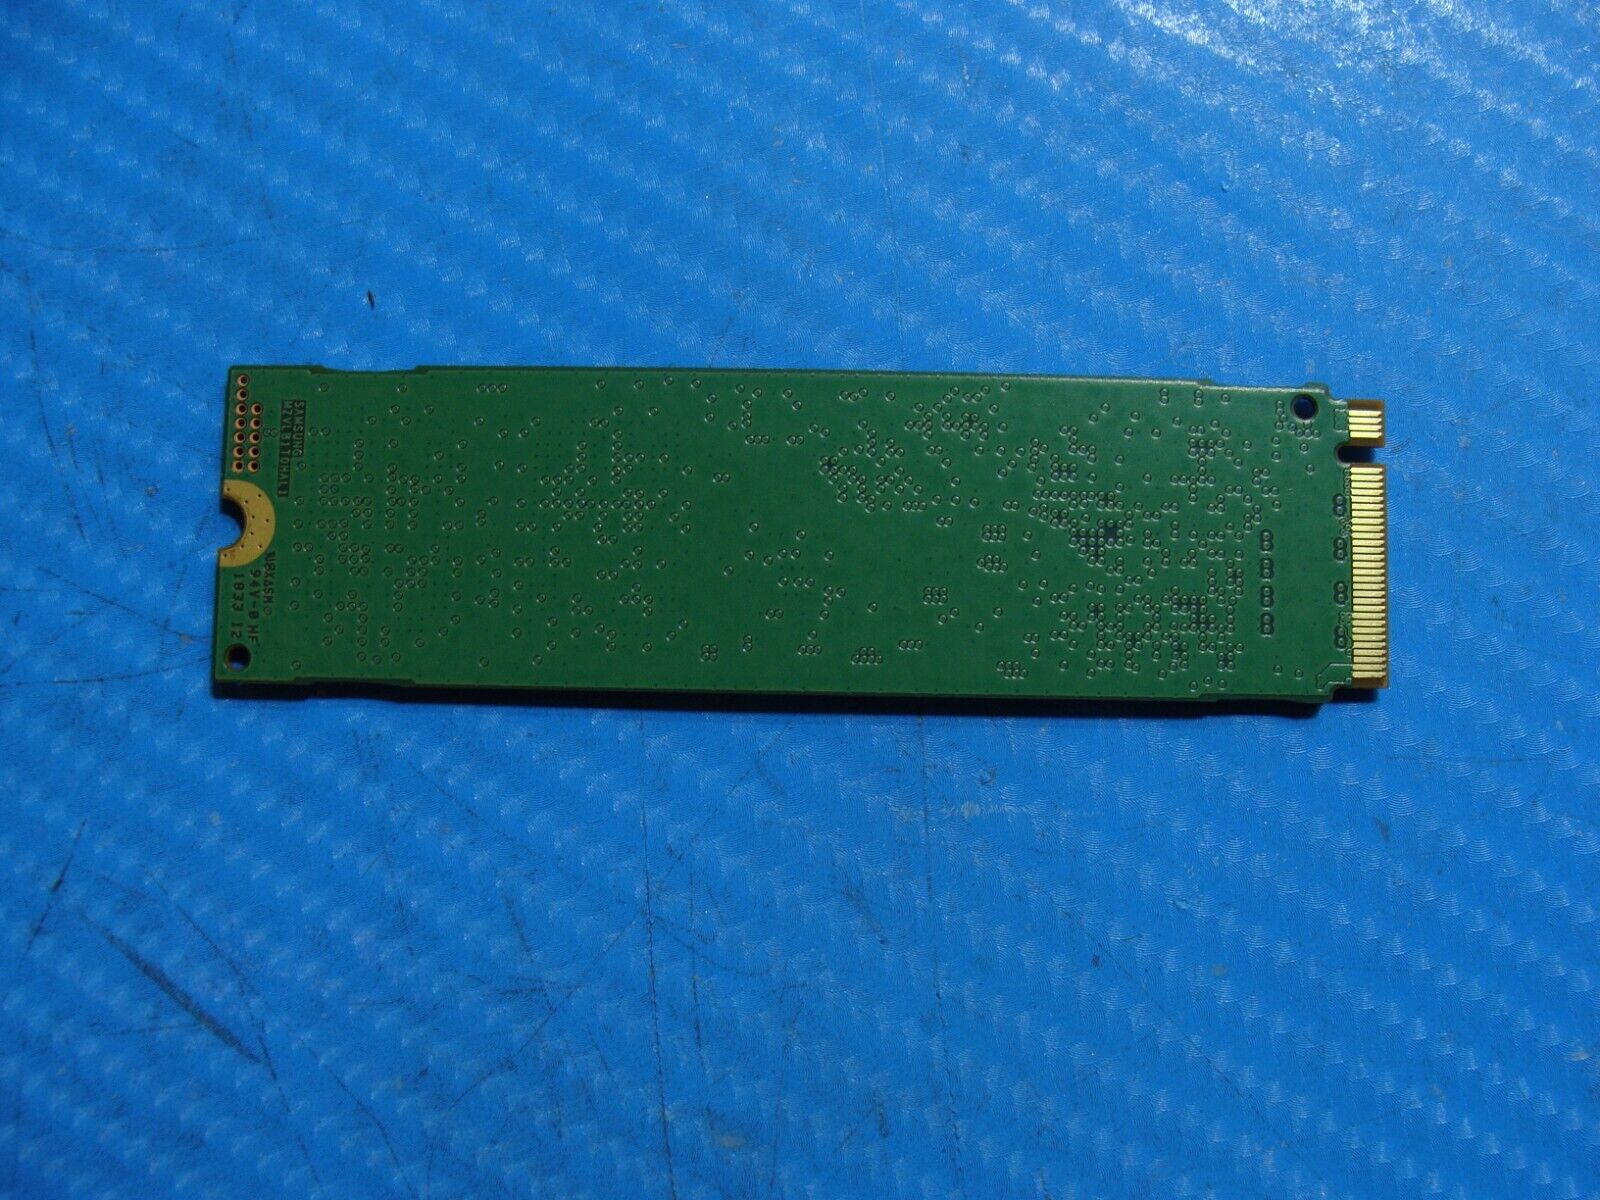 Dell 7290 Samsung 256GB NVMe M.2 SSD Solid State Drive MZVLB256HAHQ-000D1 M7DVX